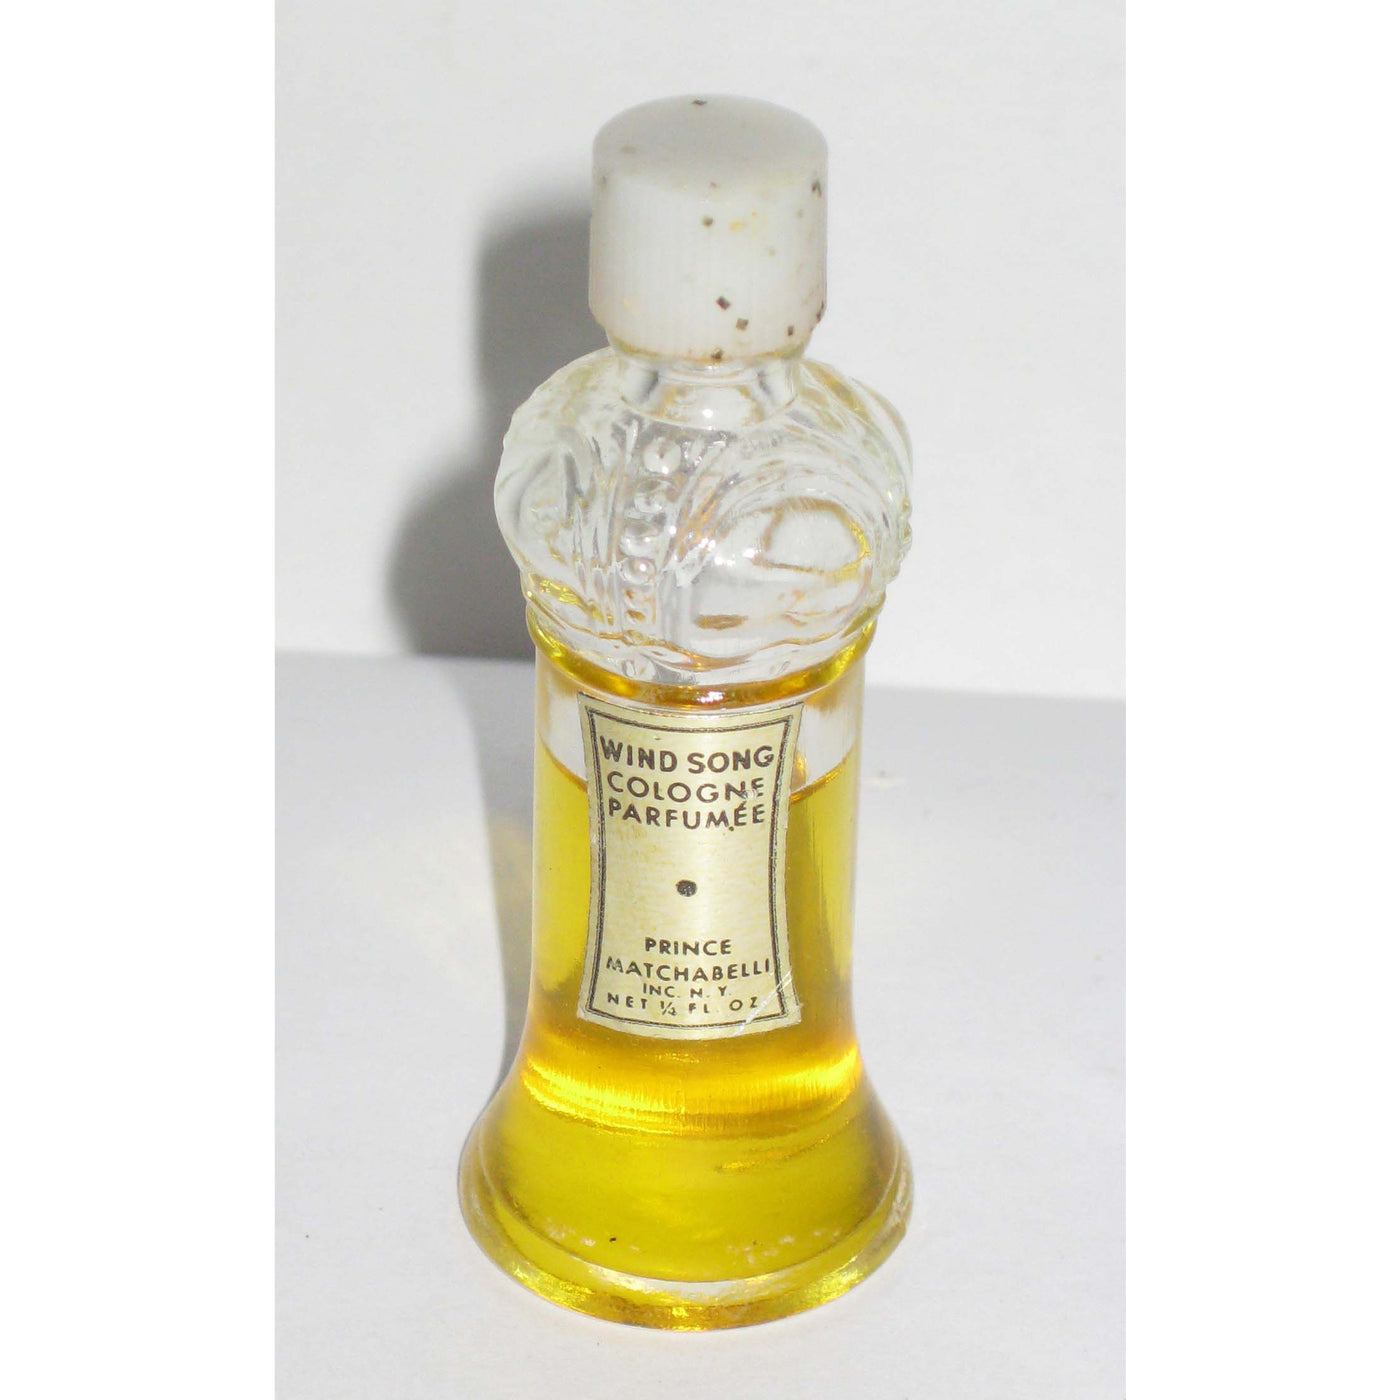 Vintage Wind Song Cologne Mini By Prince Matchabelli